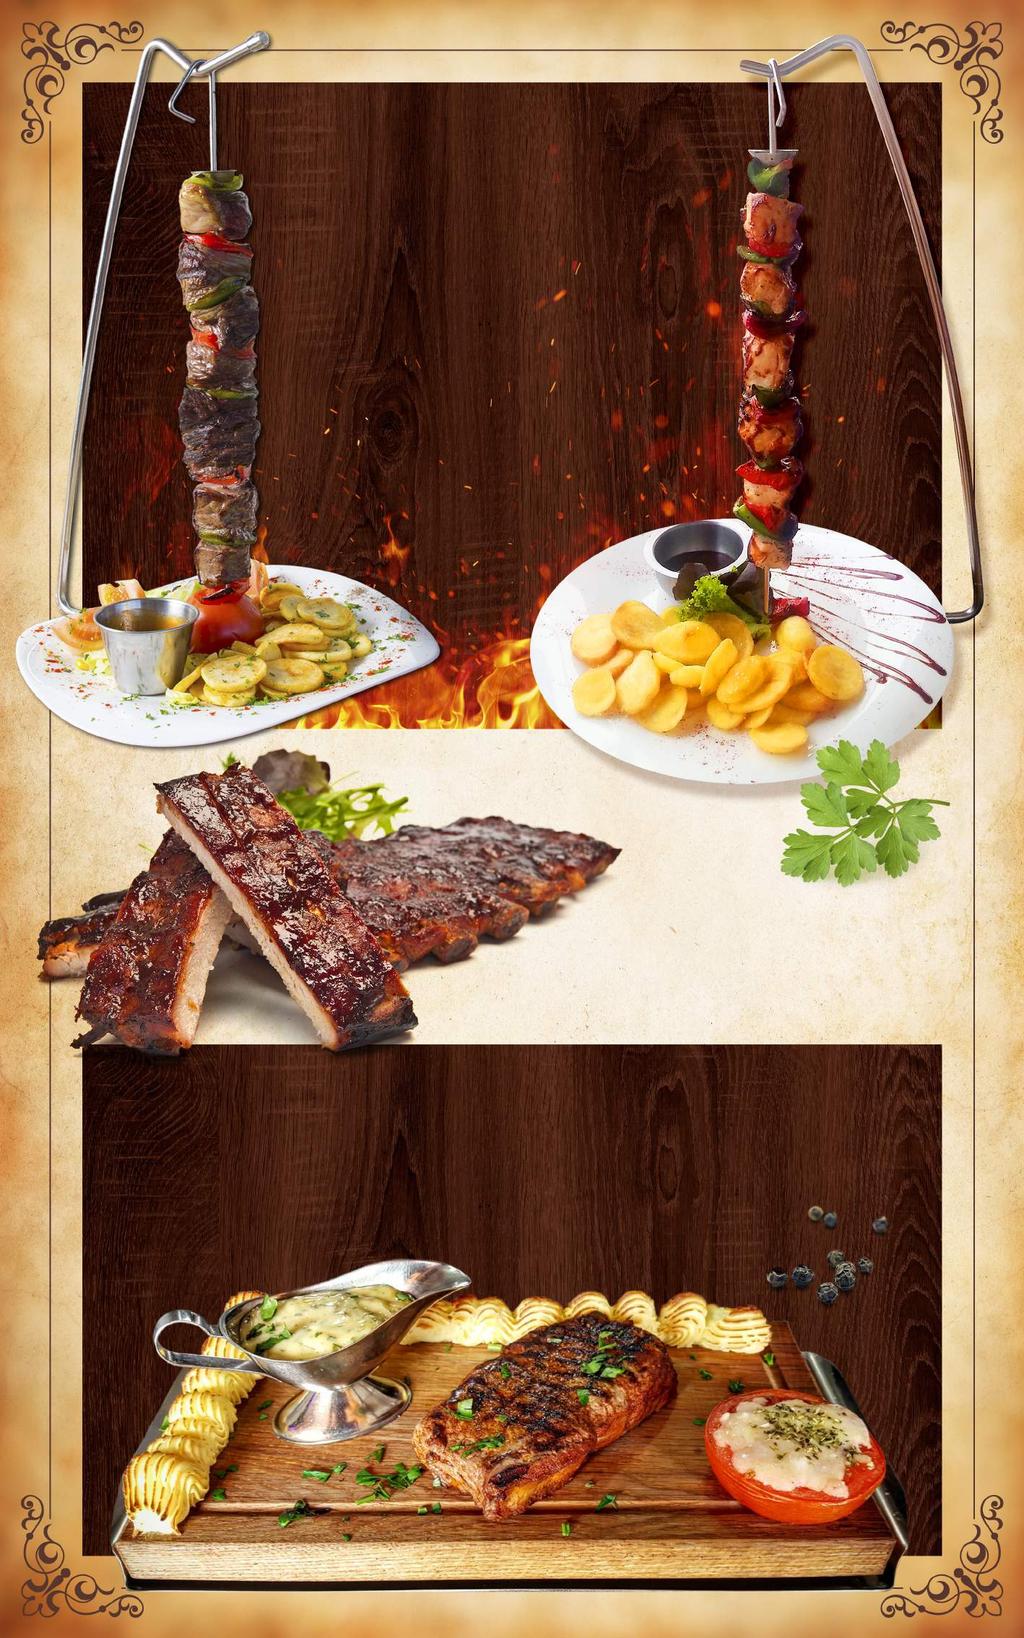 25. 26. Espetada Skewer CHICKEN 12,90 FILLET OF BEEF 15,90 RIBS 27. HONEY BBQ SPARE RIBS 10,90 Plank Steak (Beef cooked on a wooden plank) 28. 29. 30. 31.